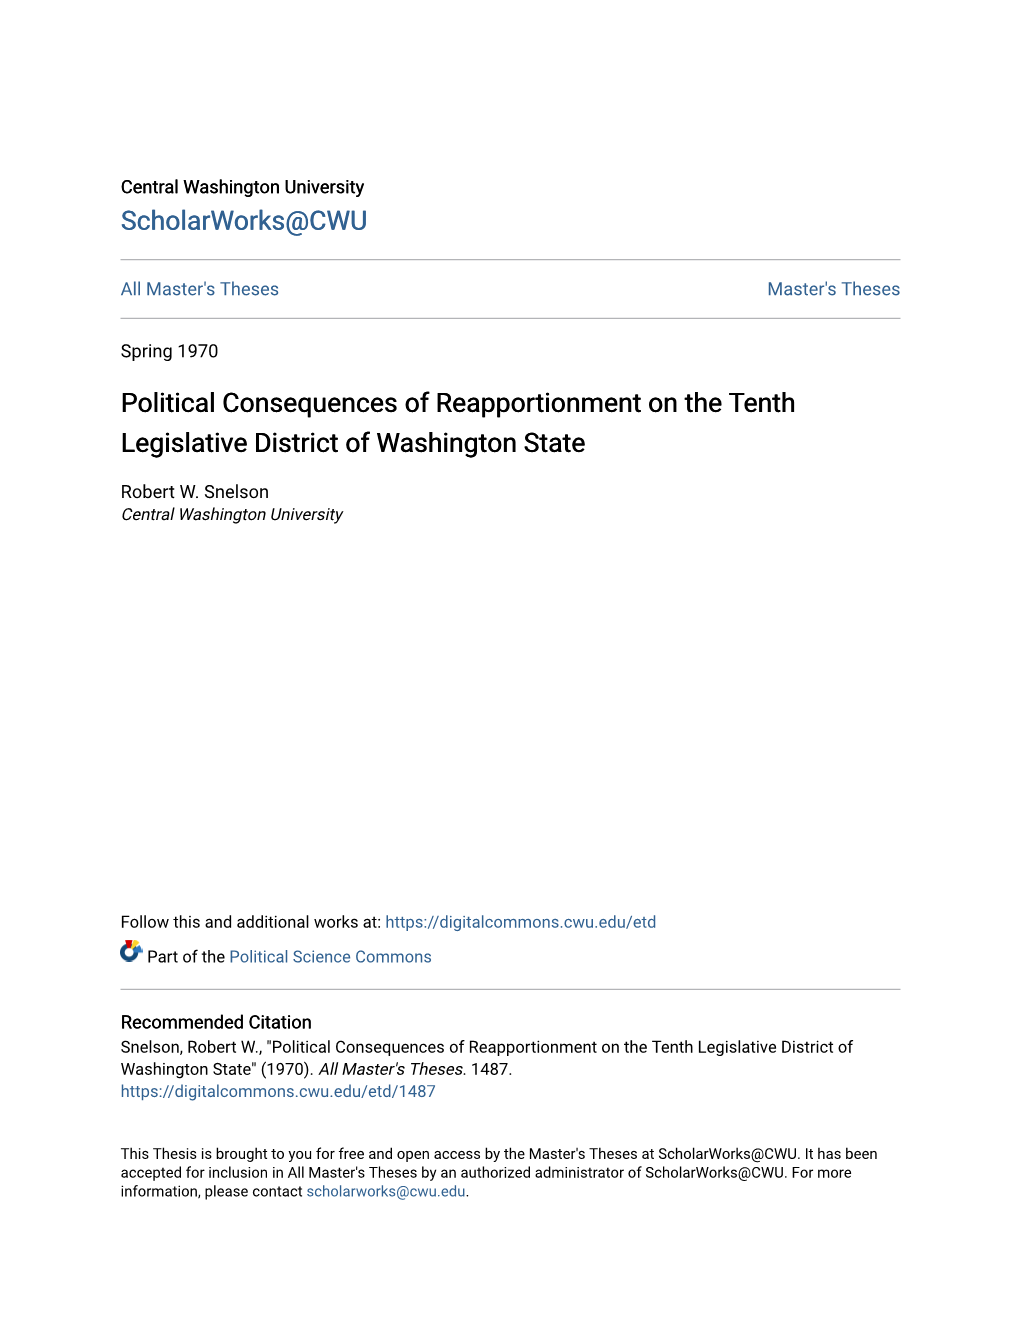 Political Consequences of Reapportionment on the Tenth Legislative District of Washington State